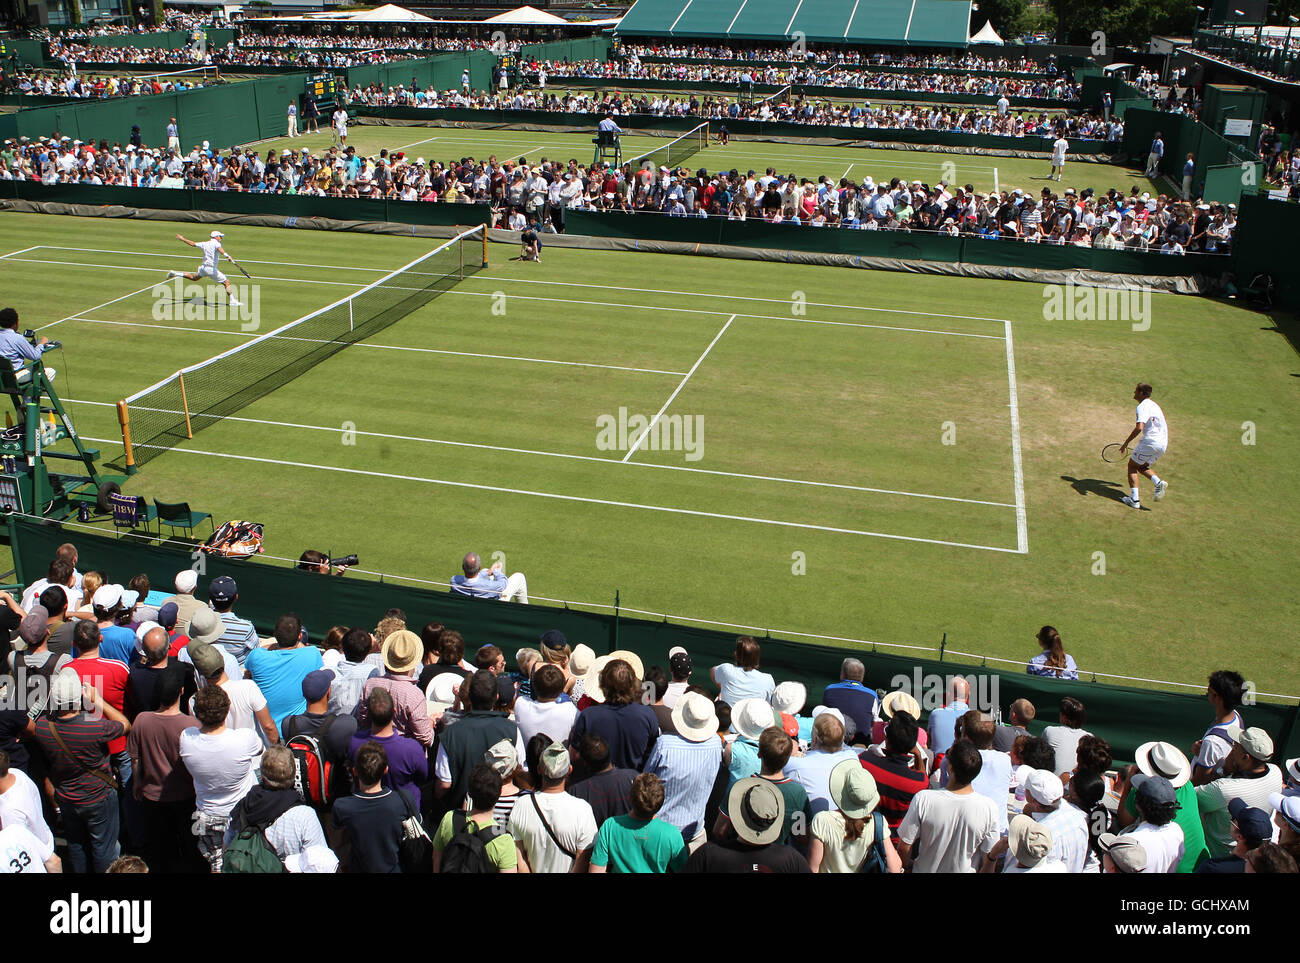 Tennis - 2010 Wimbledon Championships - Day Two - The All England Lawn Tennis and Croquet Club. A view across courts 8, 9, 10 and 11 Stock Photo